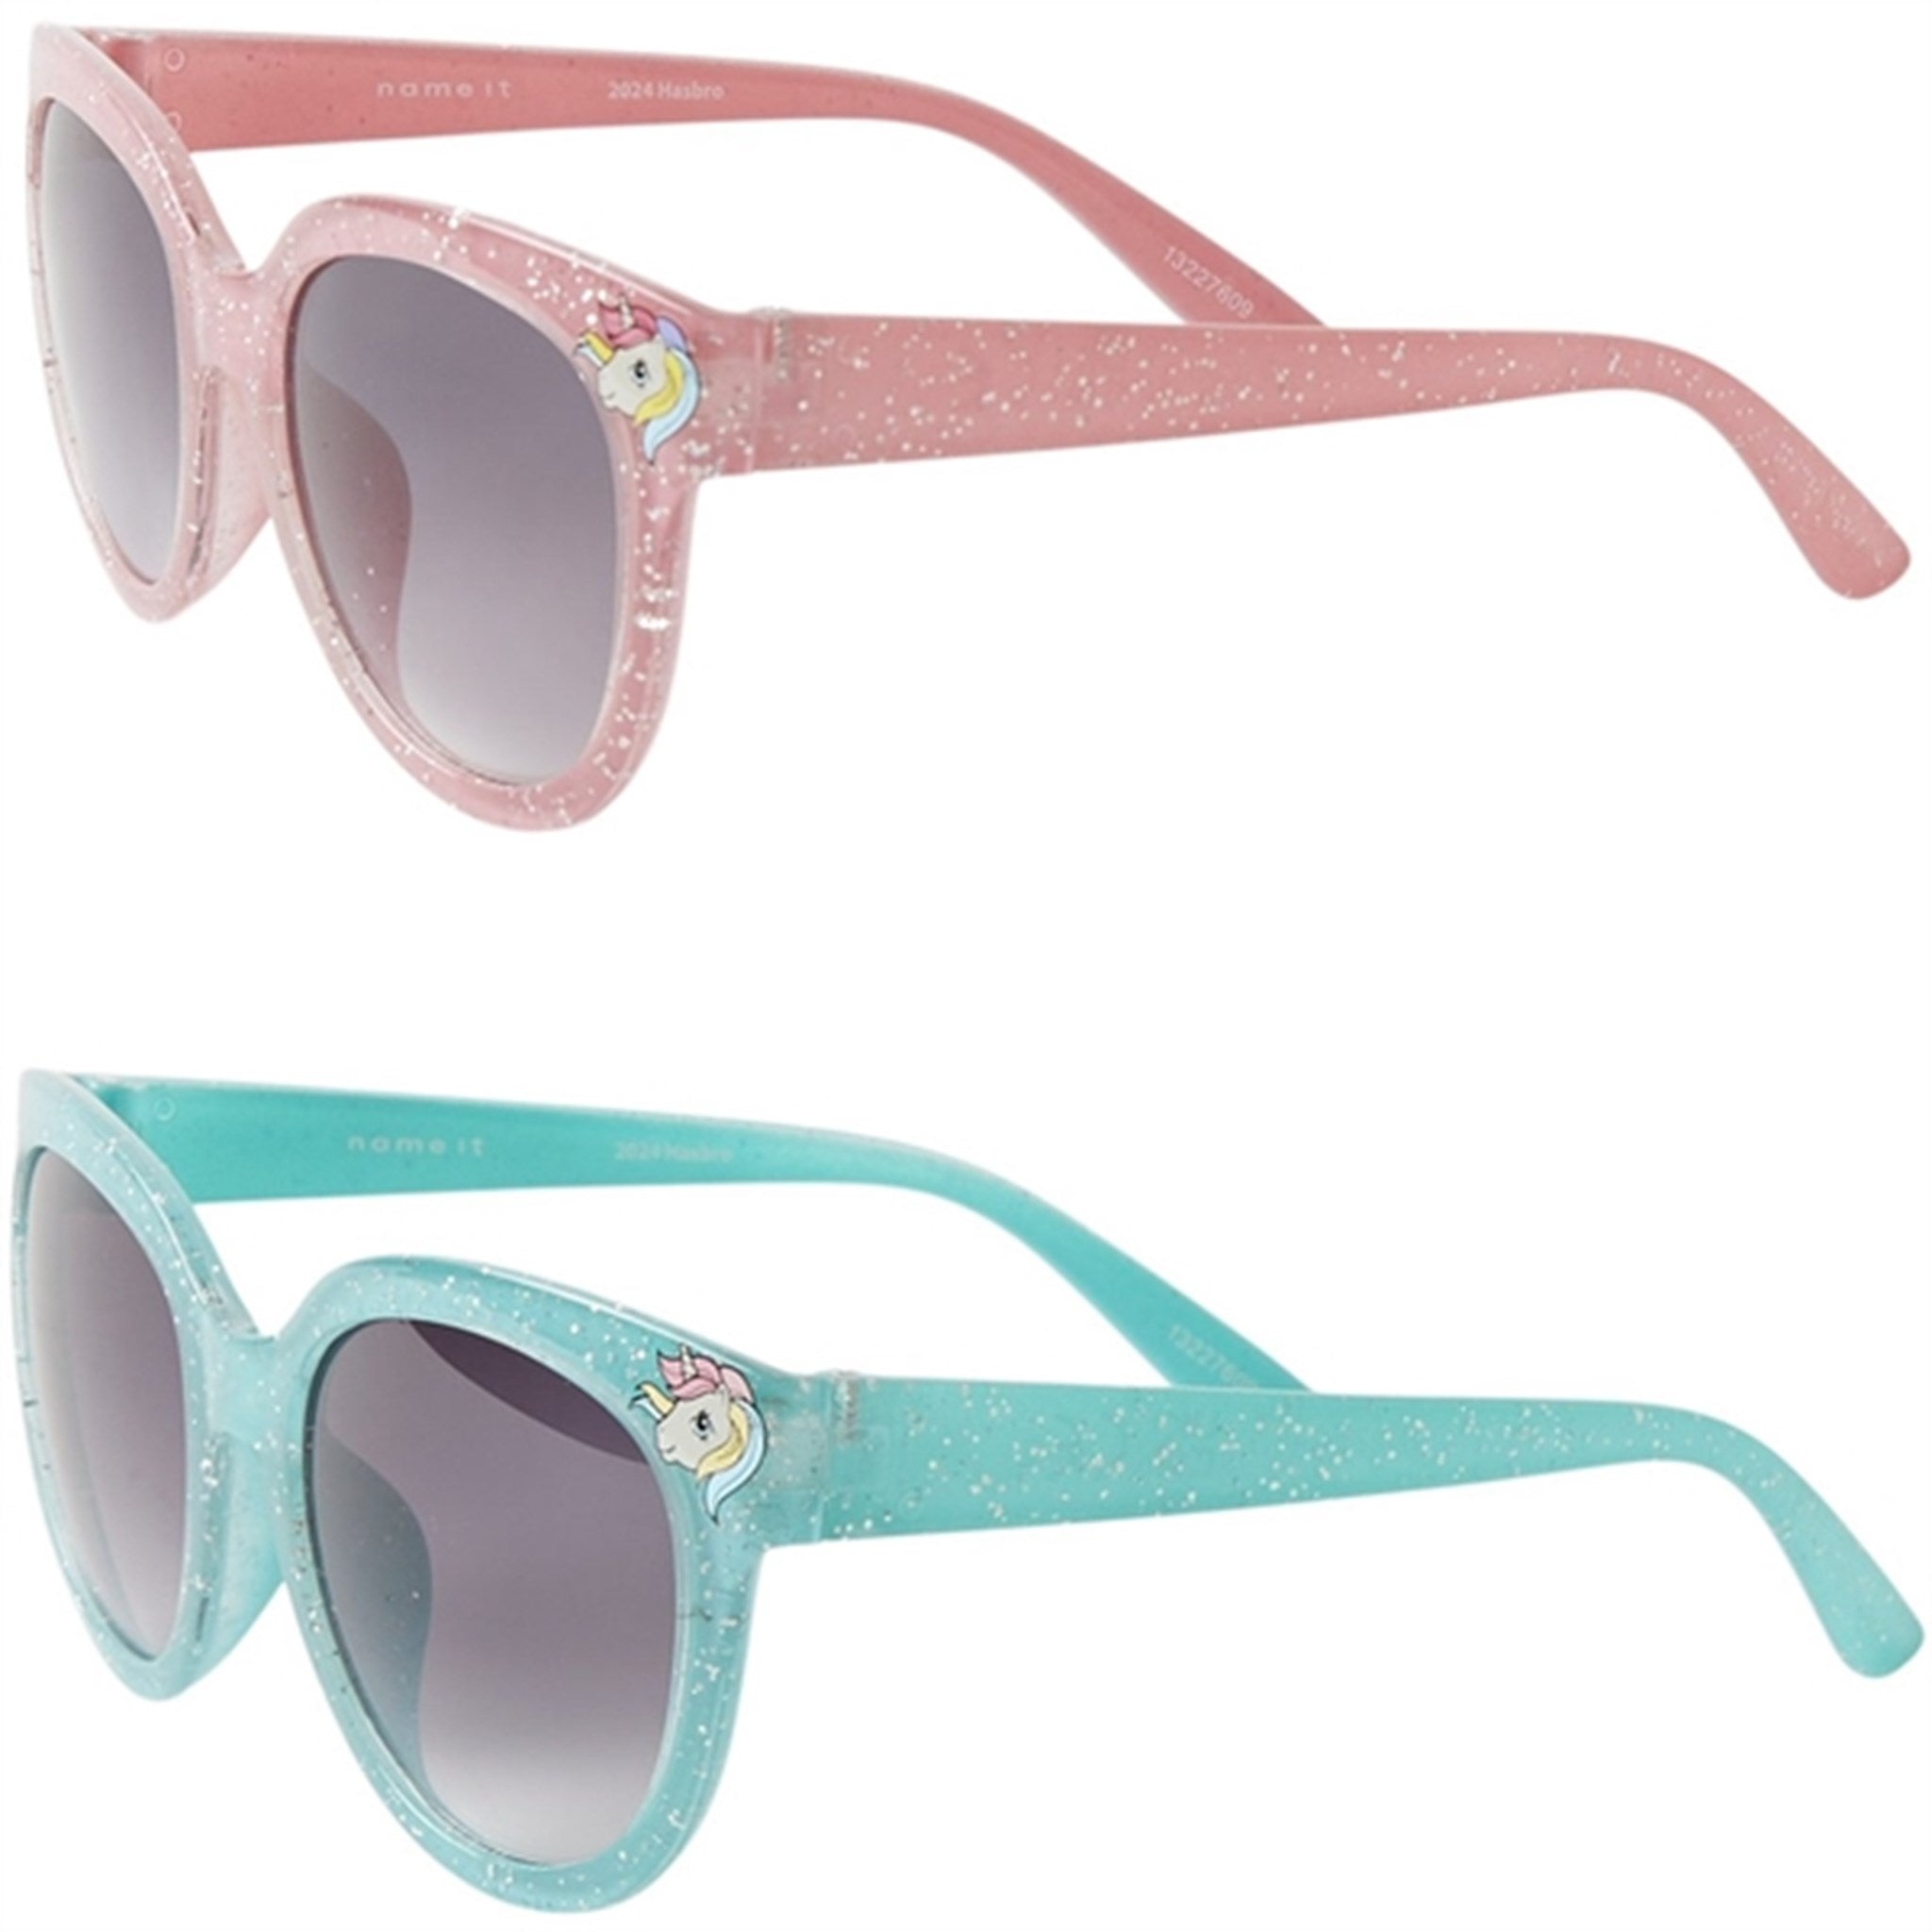 Name it Murex Shell Maria My Little Pony Sunglasses 2-pack 2